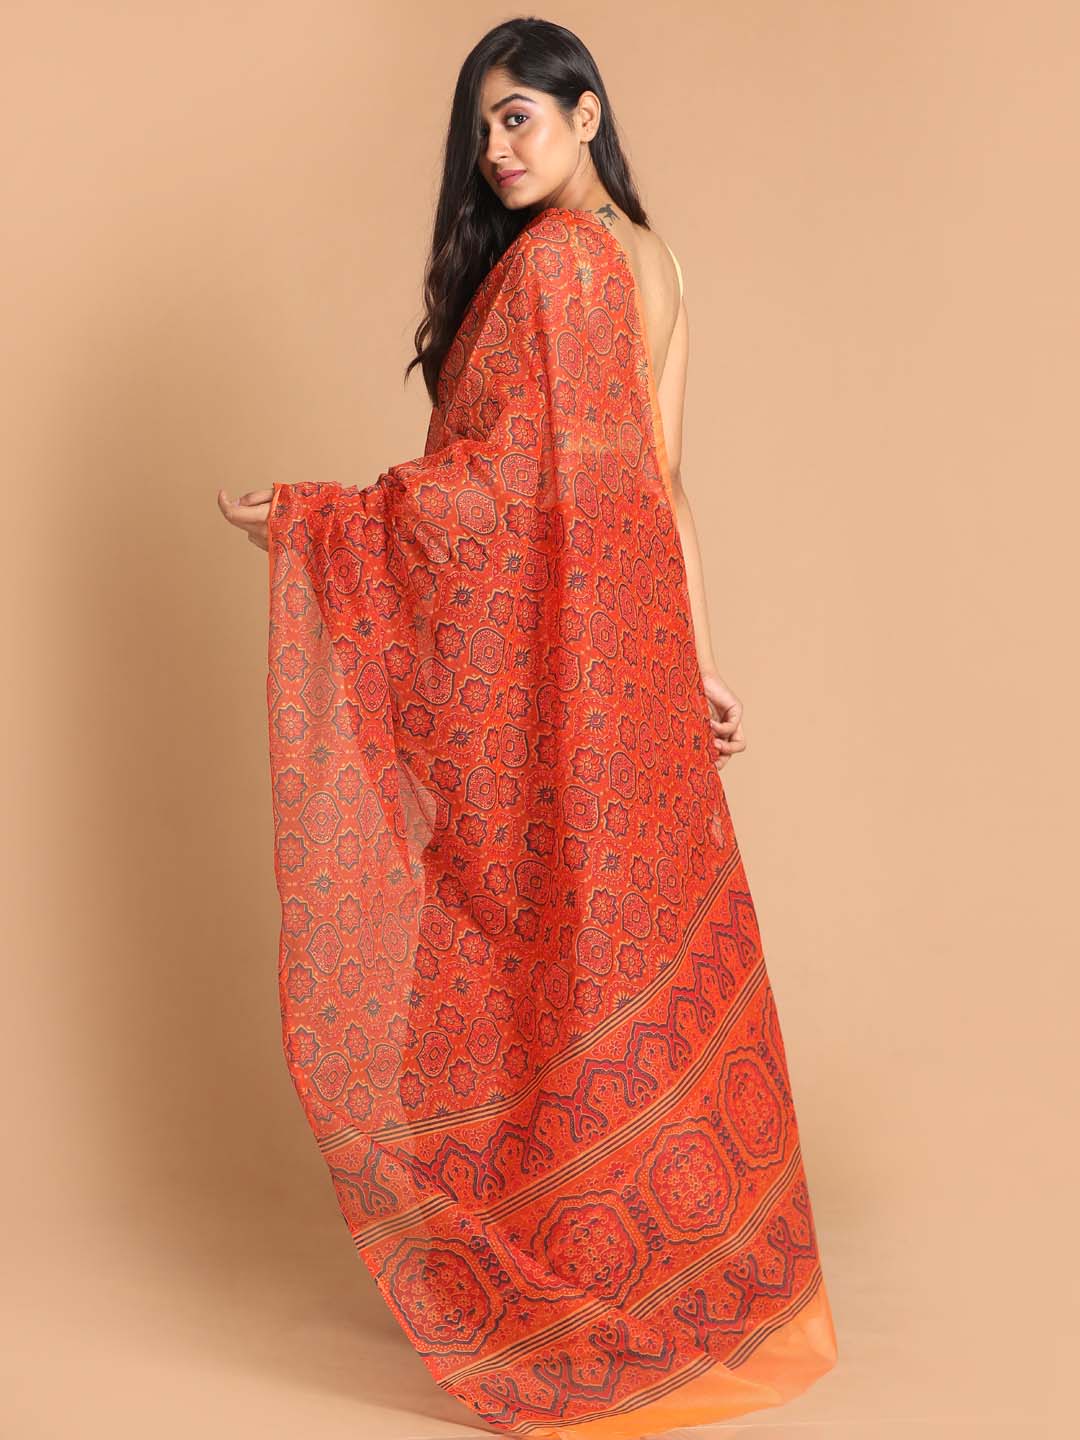 Indethnic Printed Cotton Blend Saree in Coral - View 3